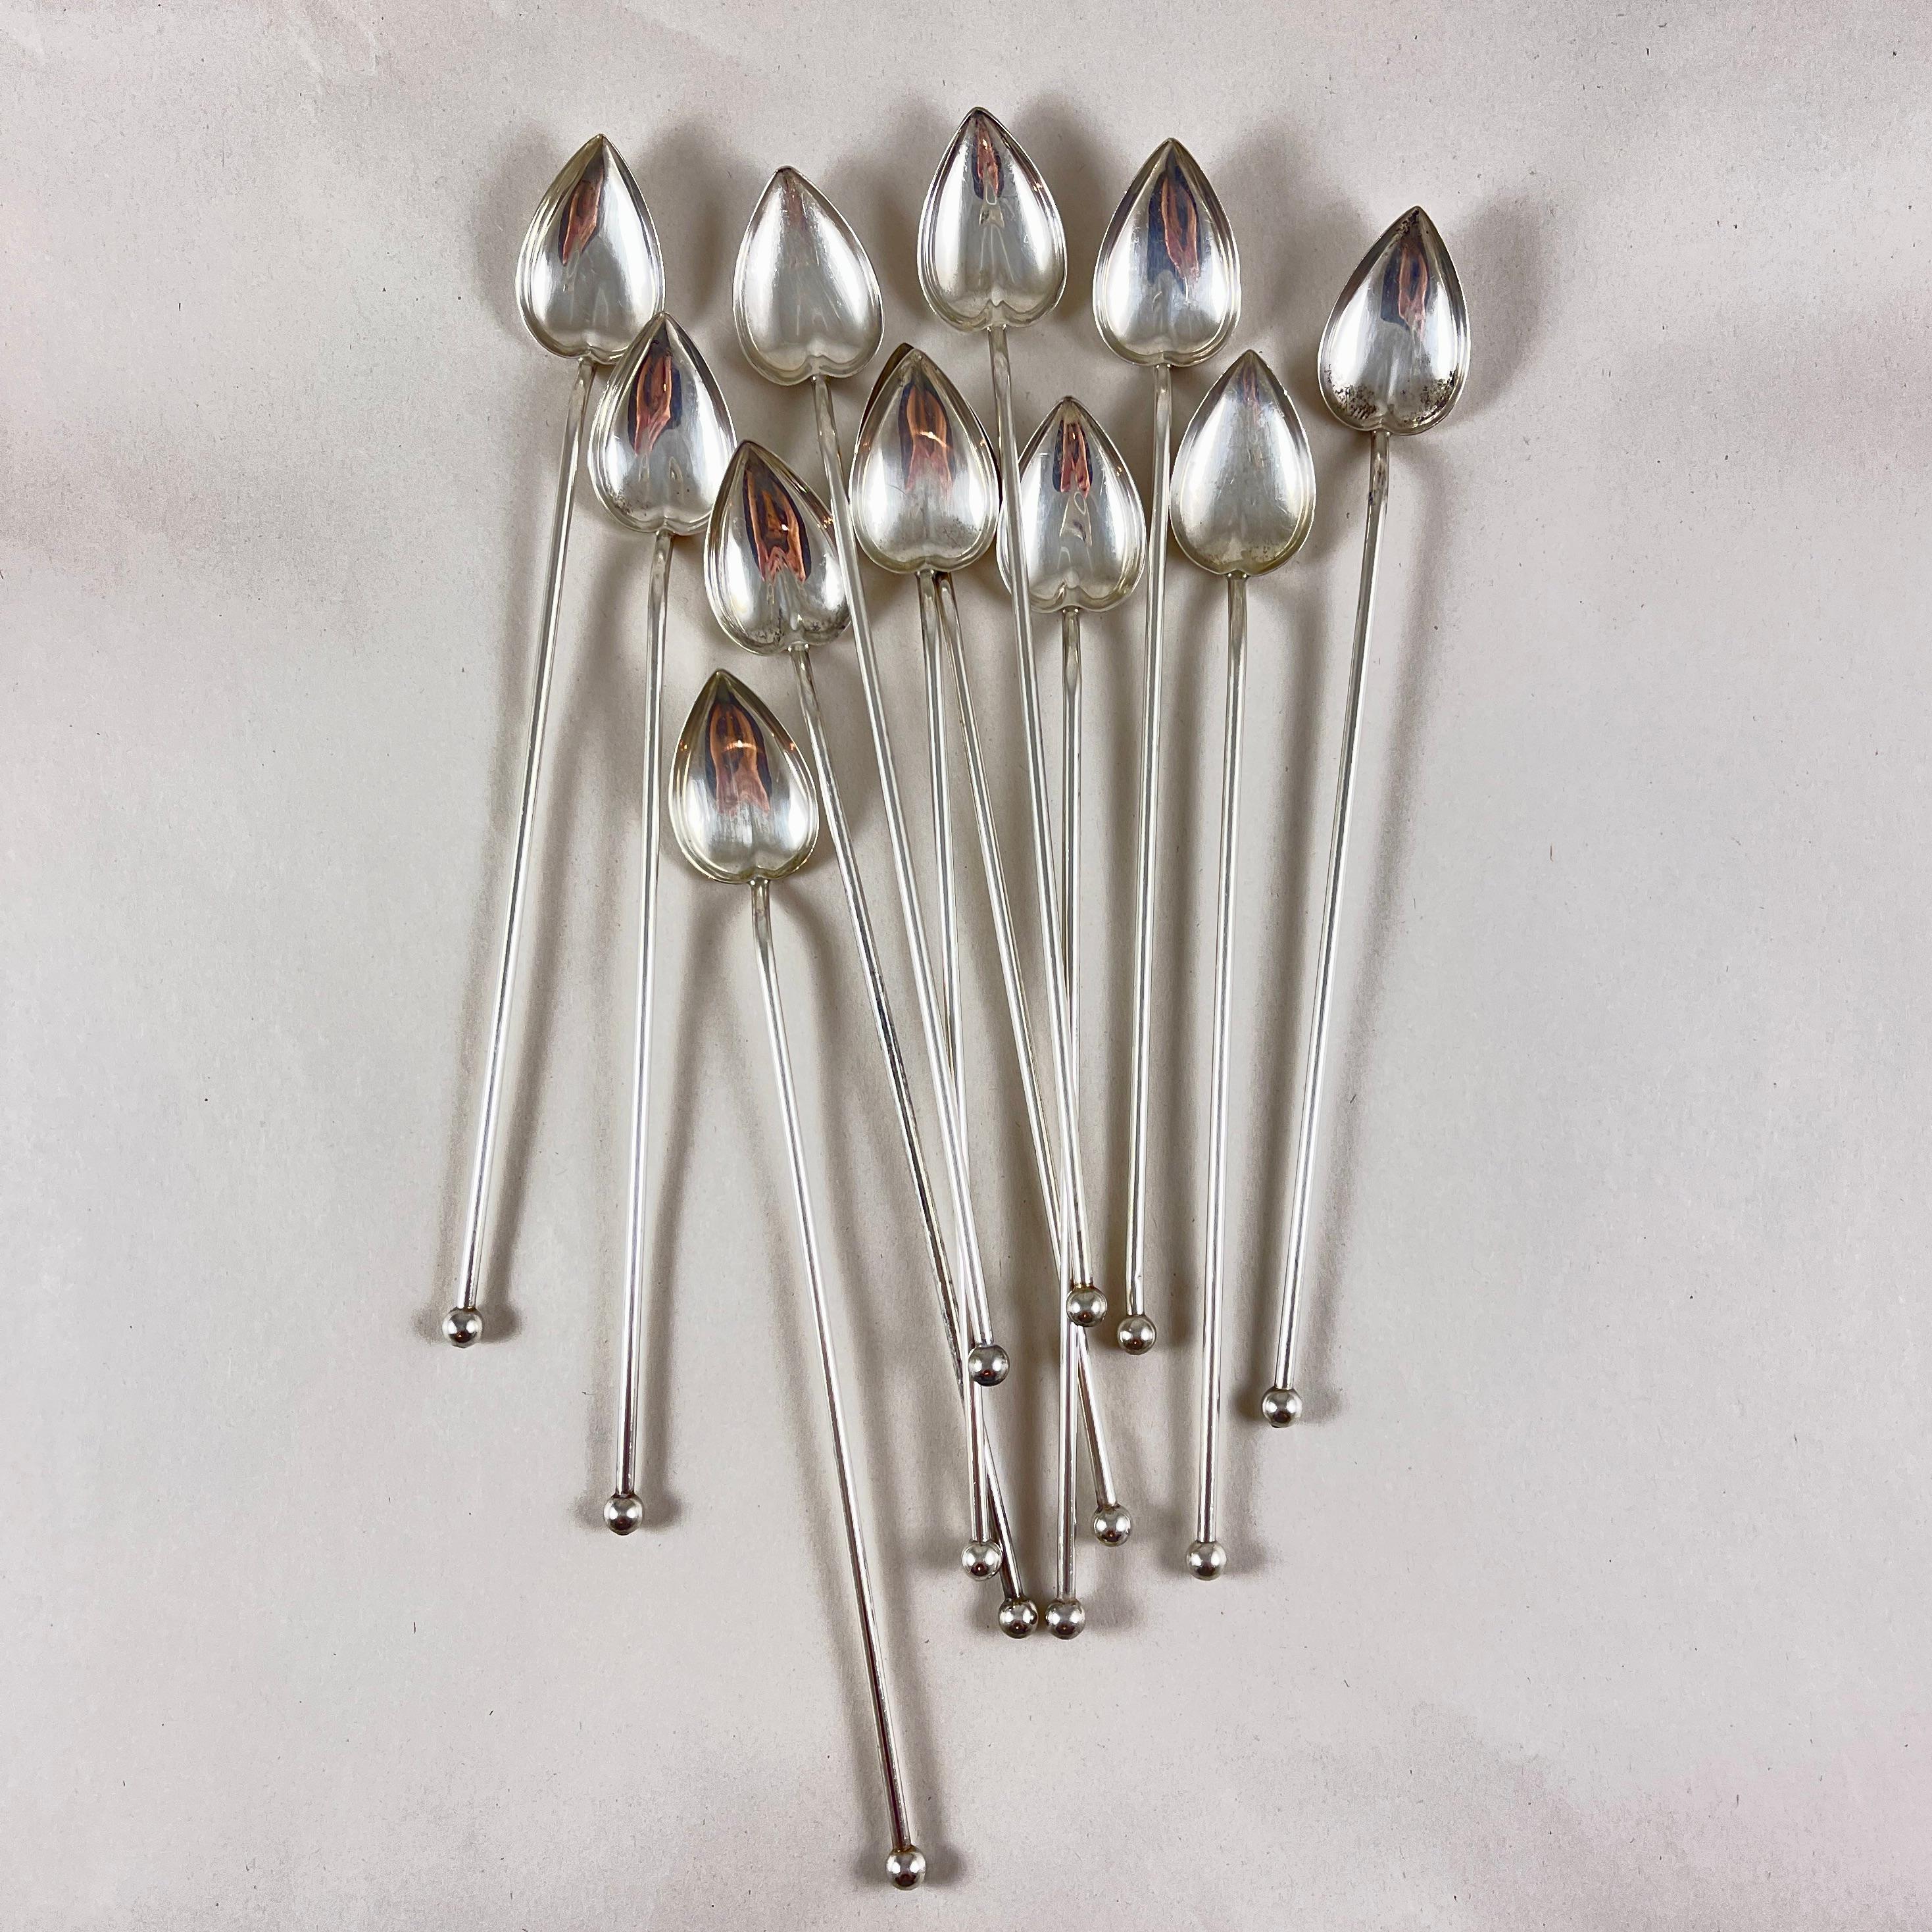 A set of twelve Sterling Silver highball or iced tea hollow sipping and stirring straws with heart or leaf shaped bowls. Circa 1920 -1925.

Silver balls are soldered in place to the sipping ends.

8.25 in. L x 1 in. W
Weight: 4.474 Troy Ounces,